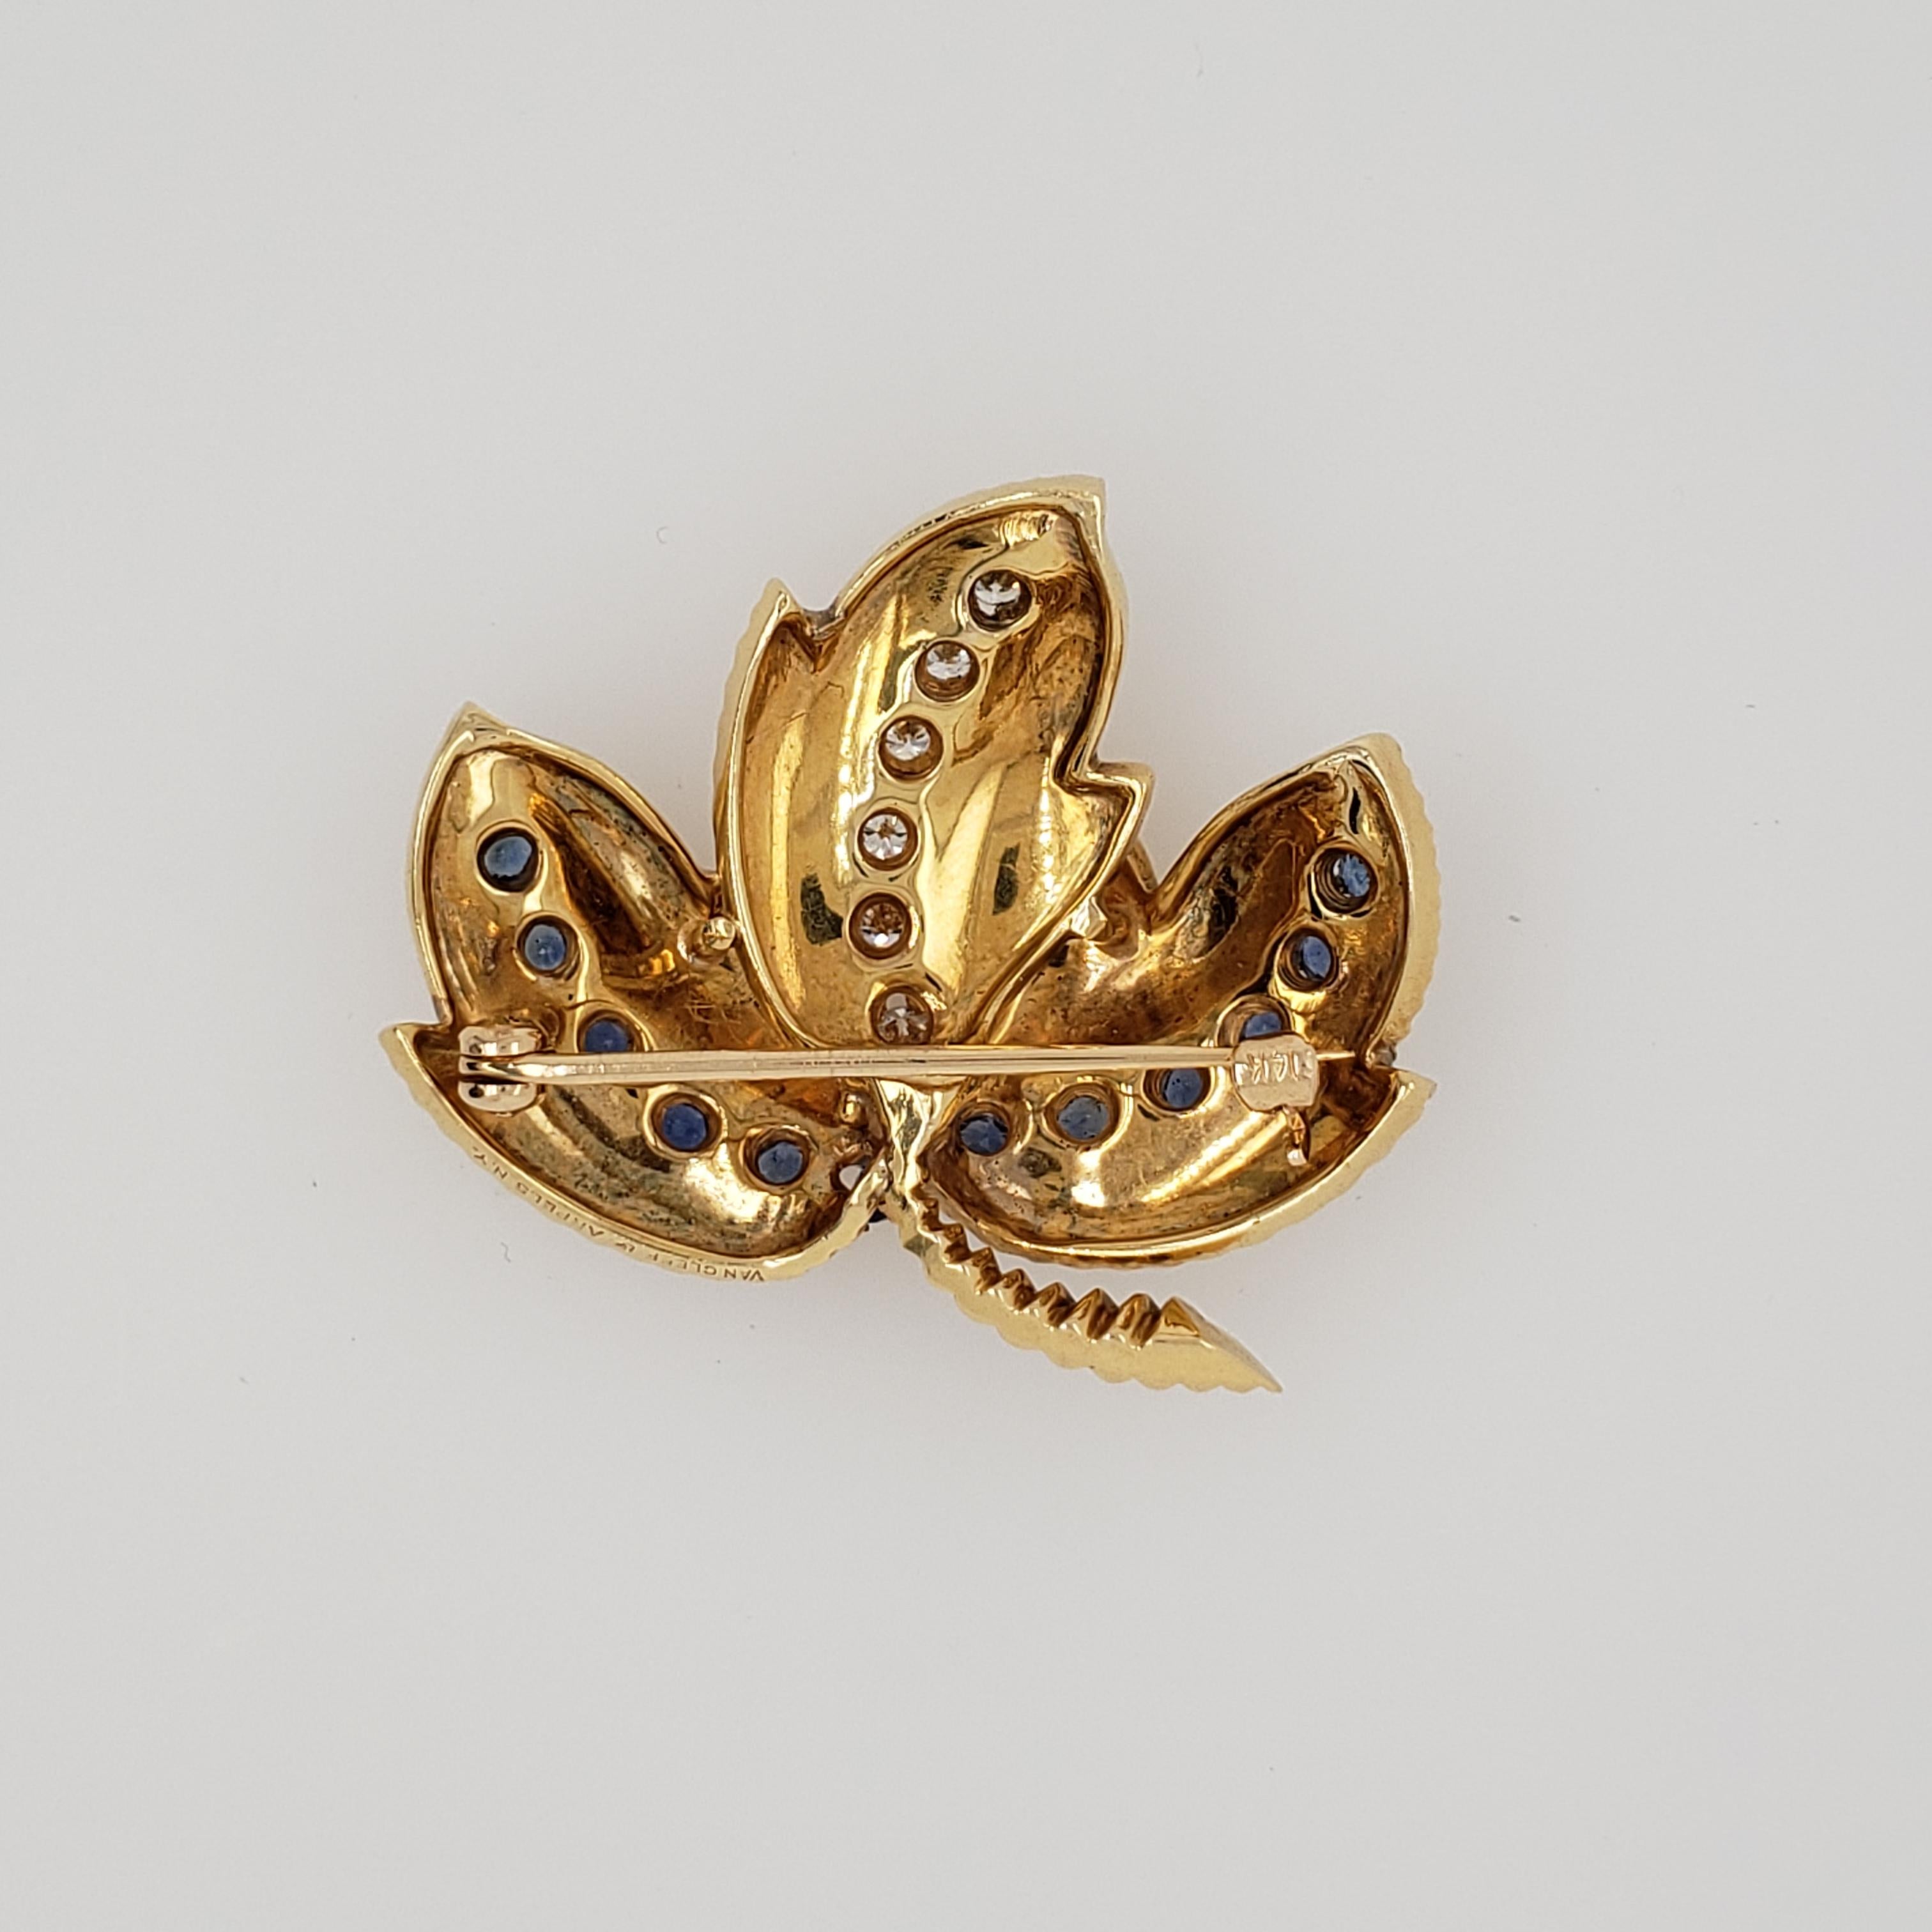 18kt Yellow Gold Maple Leaf Brooch signed Van Cleef & Arpels. Circa: 1970s. 6 Round Brilliant cut Diamonds = .36 carats total (2.5mm width for each). They are G in Color & VVS in Clarity. There are also 12 Sapphires = 1.08 carats total (.09 cts